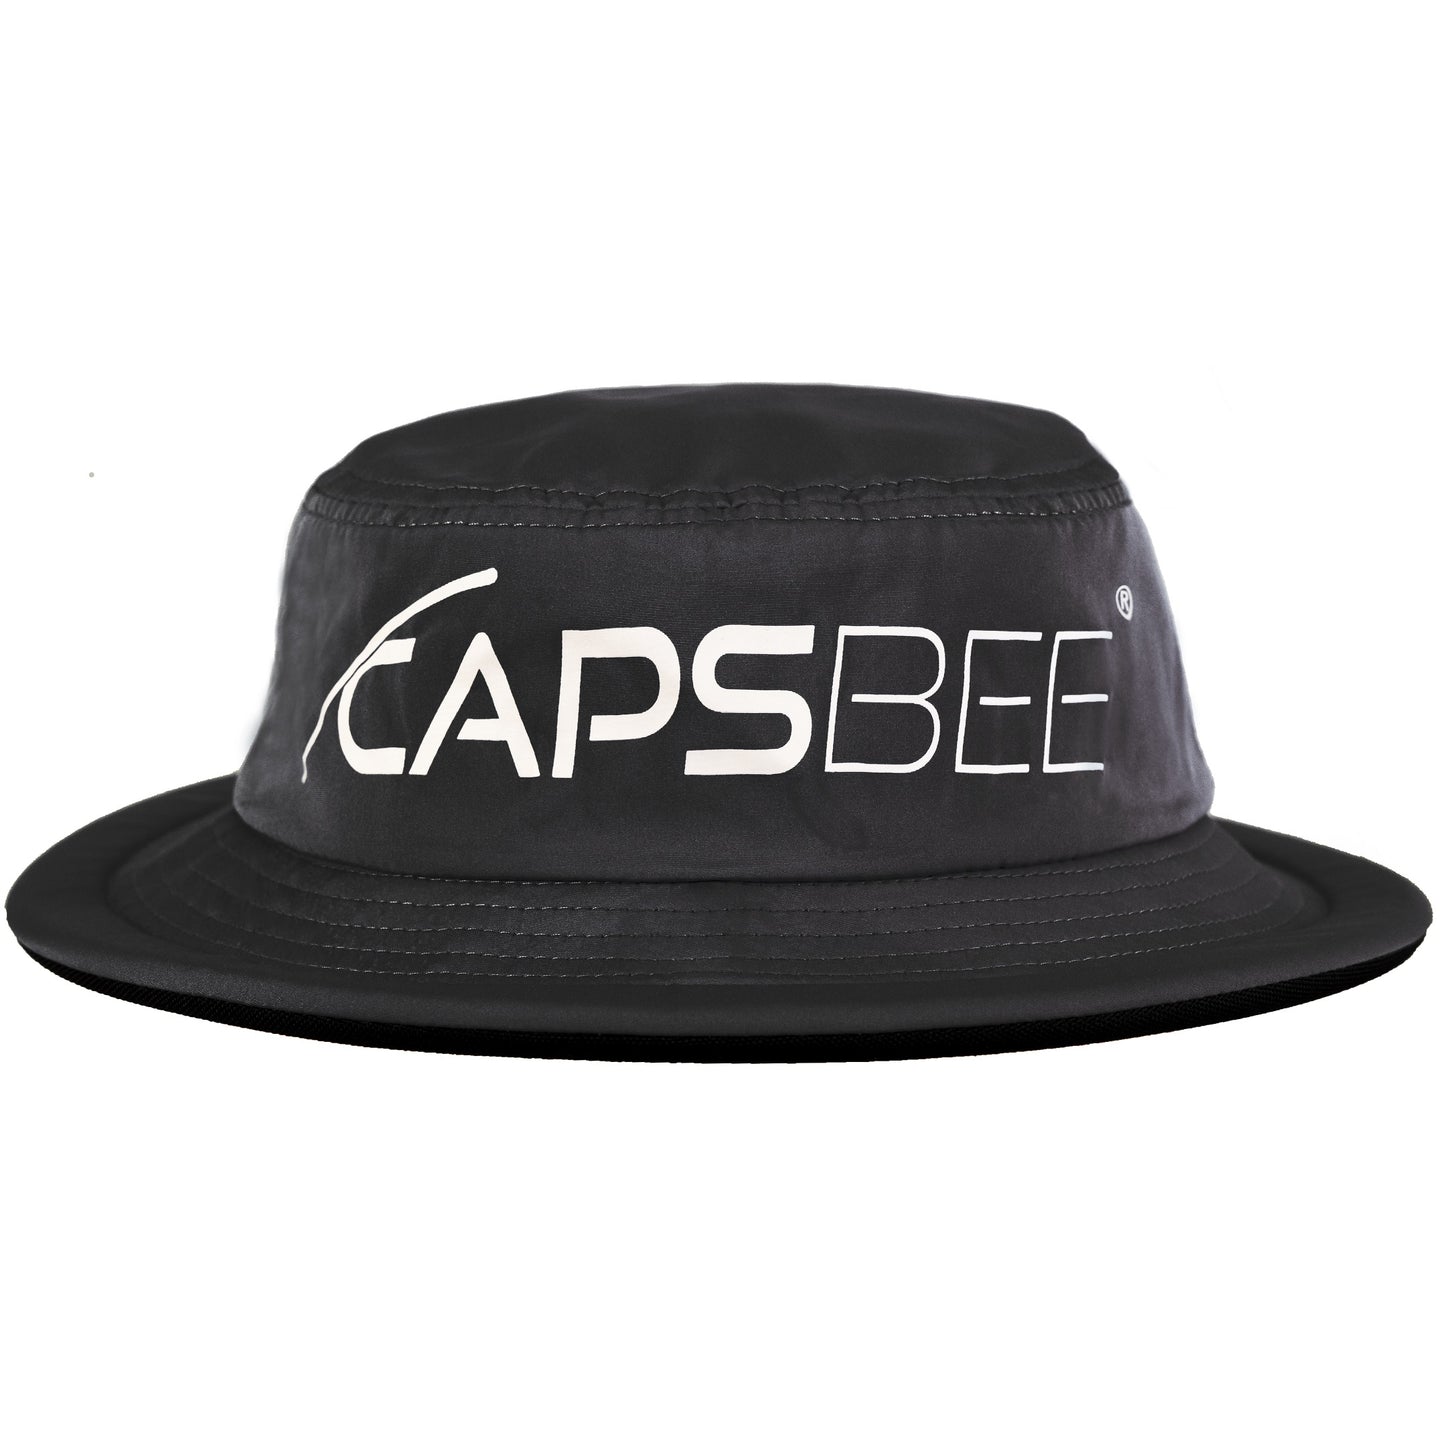 Capsbee Hat Tossing Game